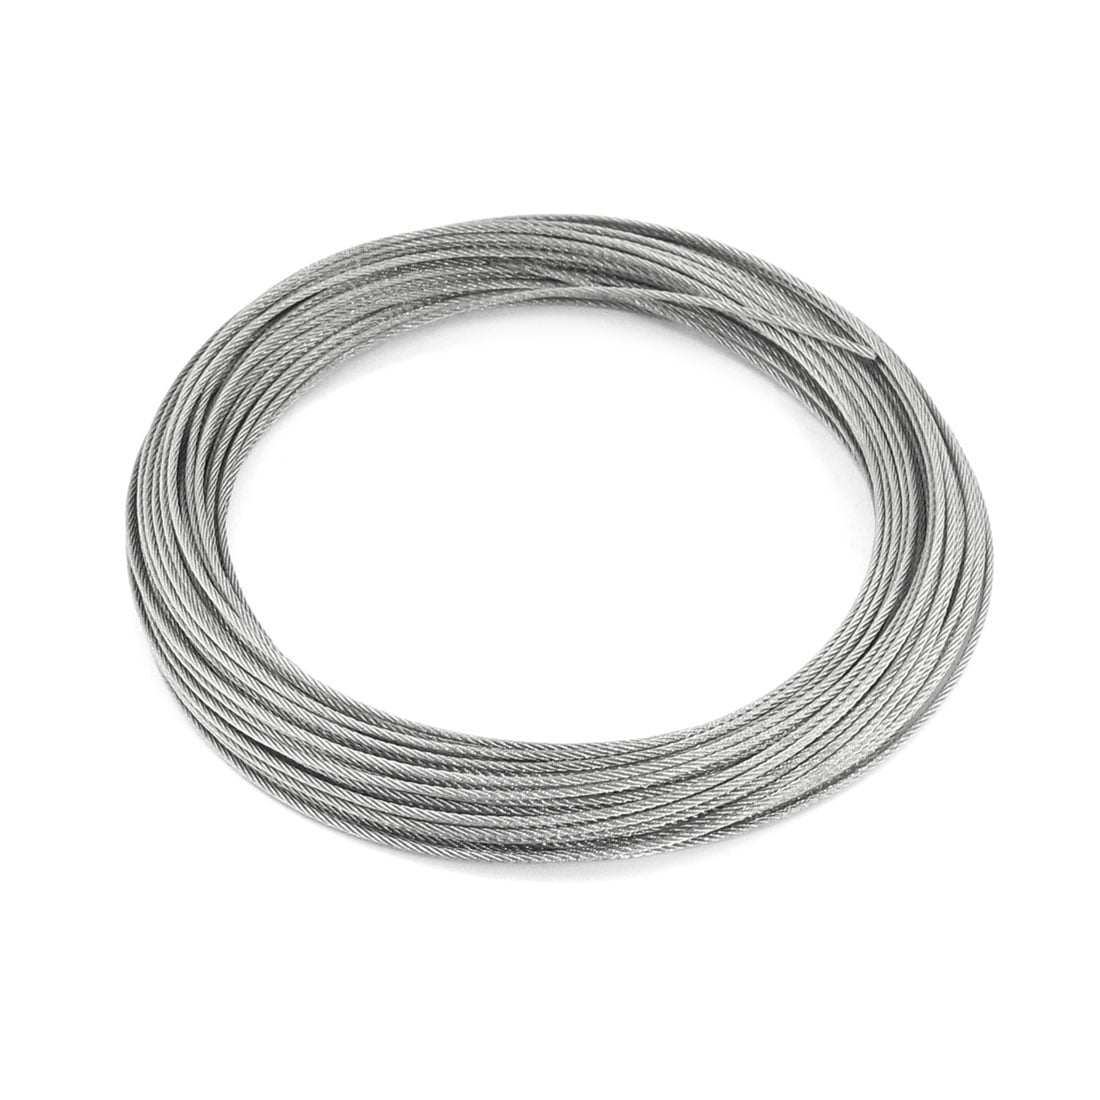 Stainless Steel Wire Rope 25 Metres of 1mm  7x7  Marine Construction 